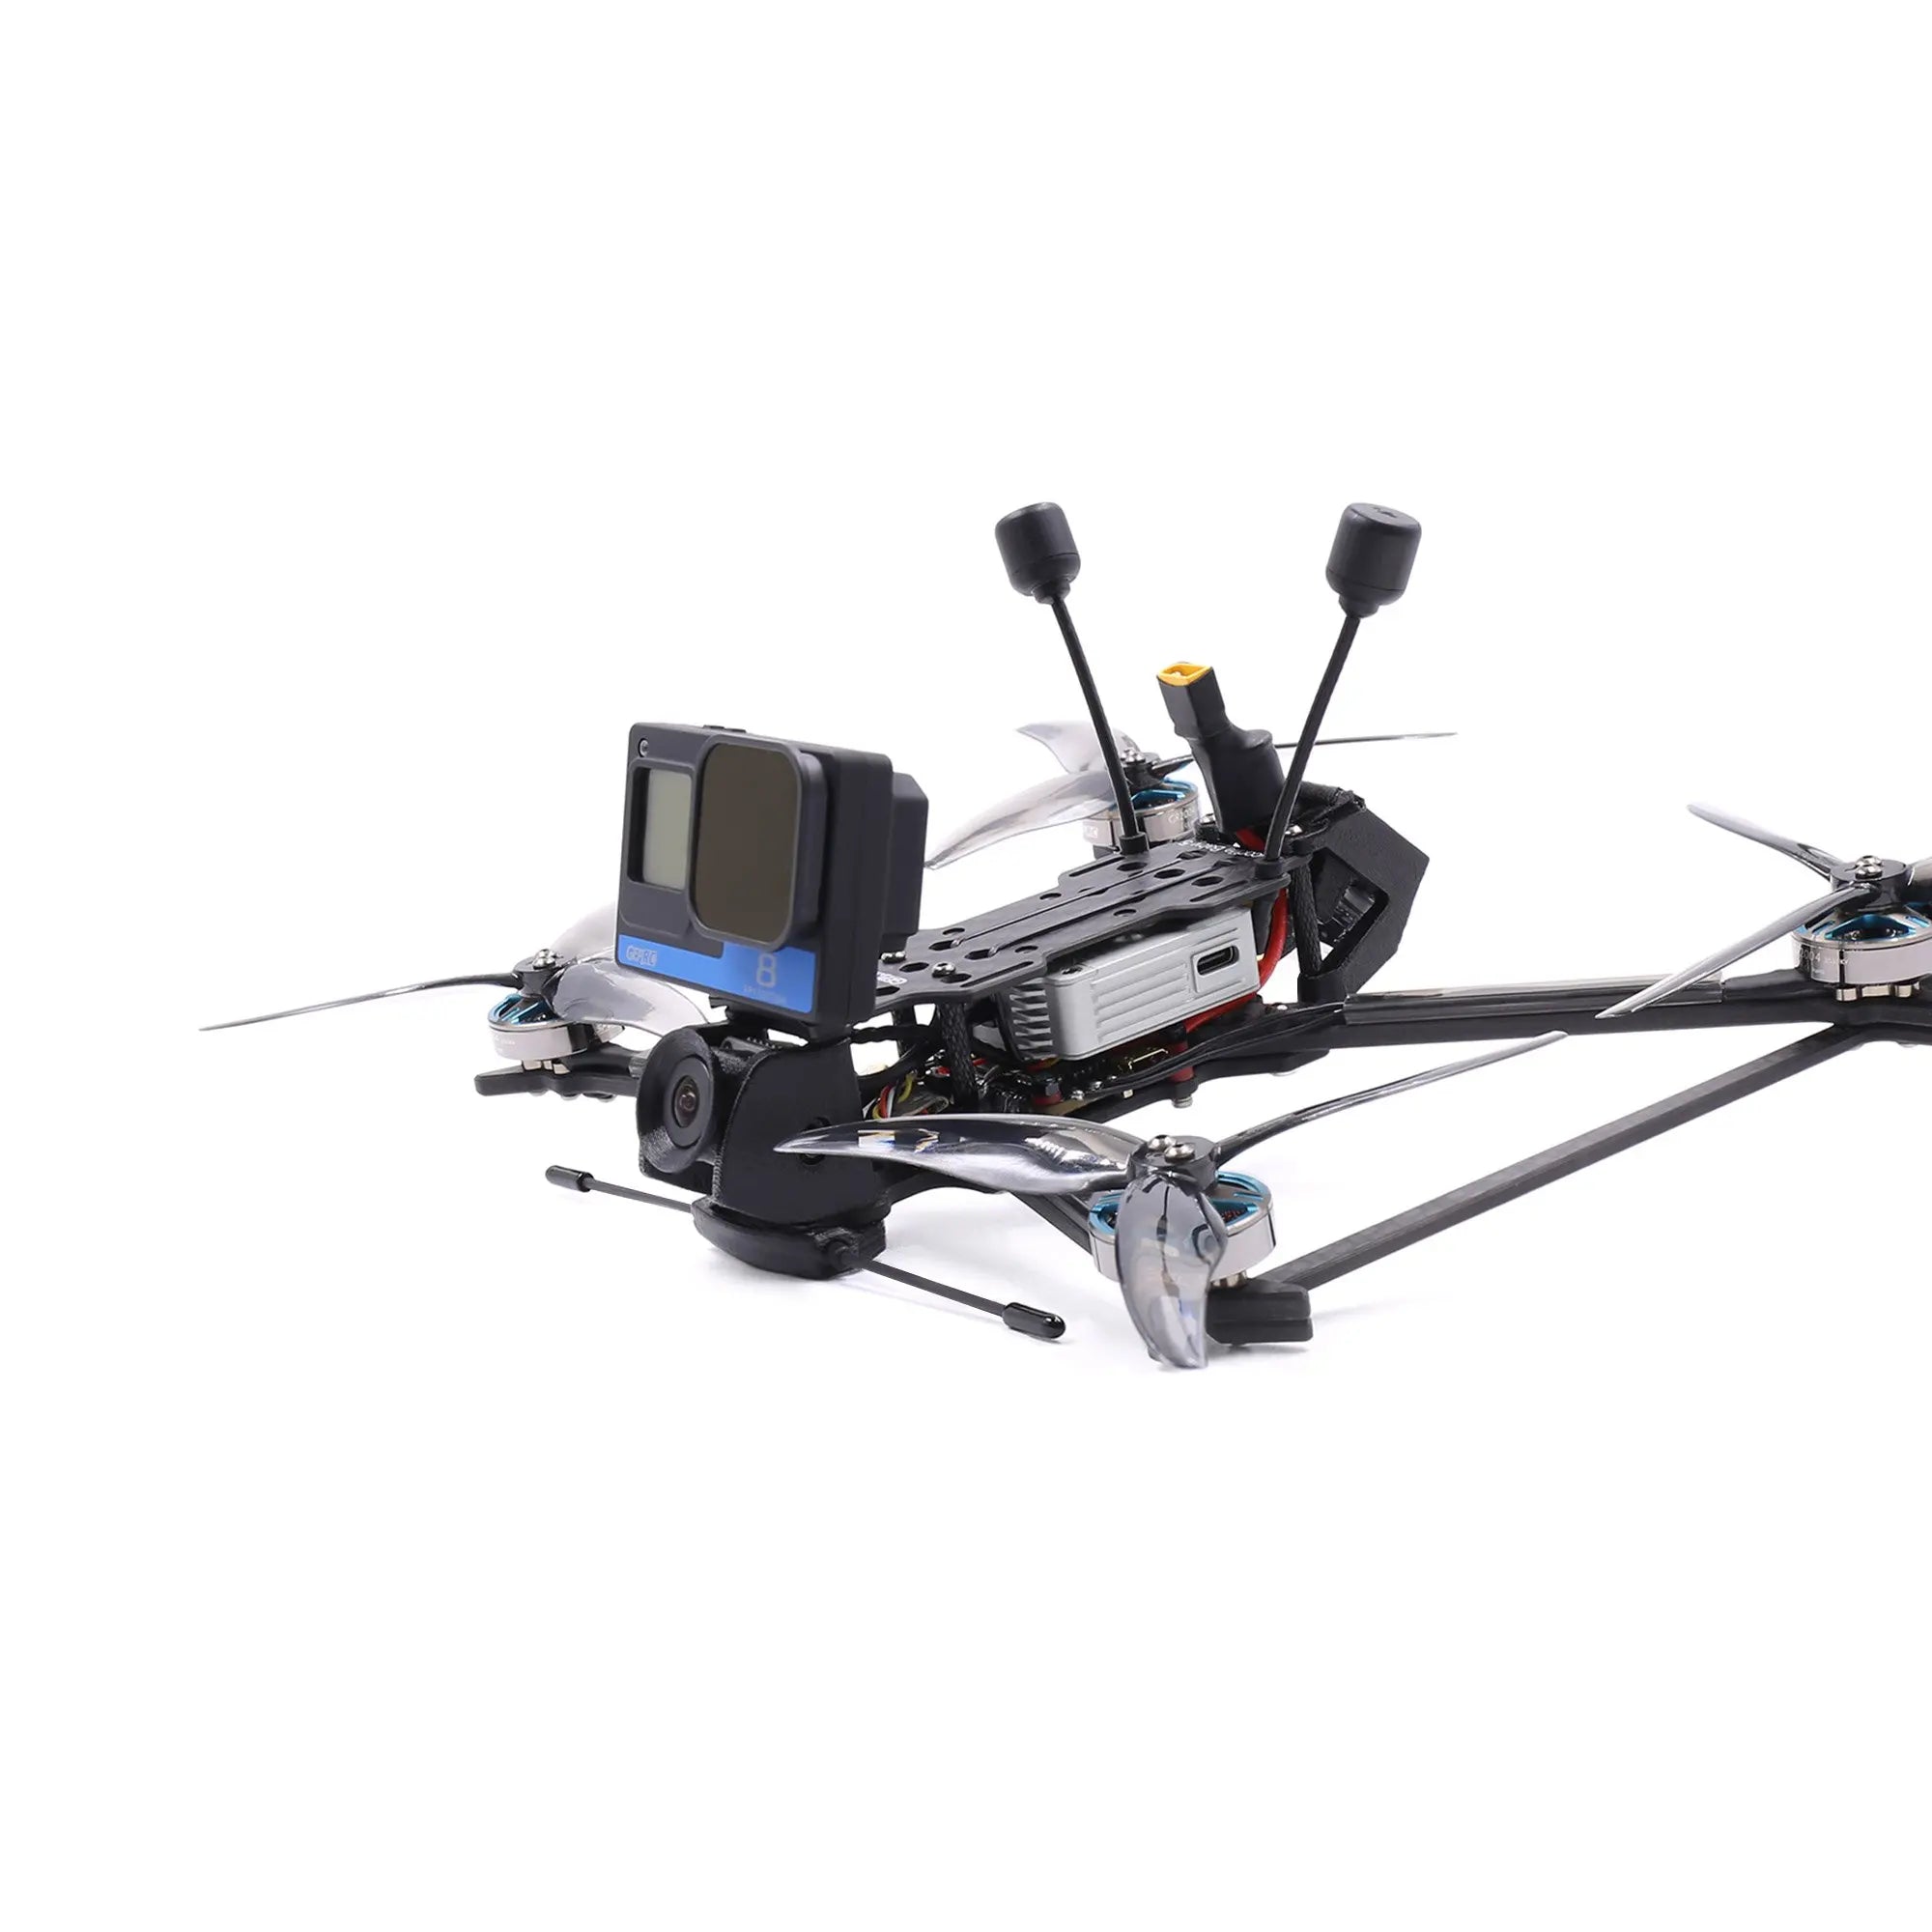 GEPRC Crocodile5 Baby FPV Drone, Crocodile5 Baby LR will be your Favourite Drone for 